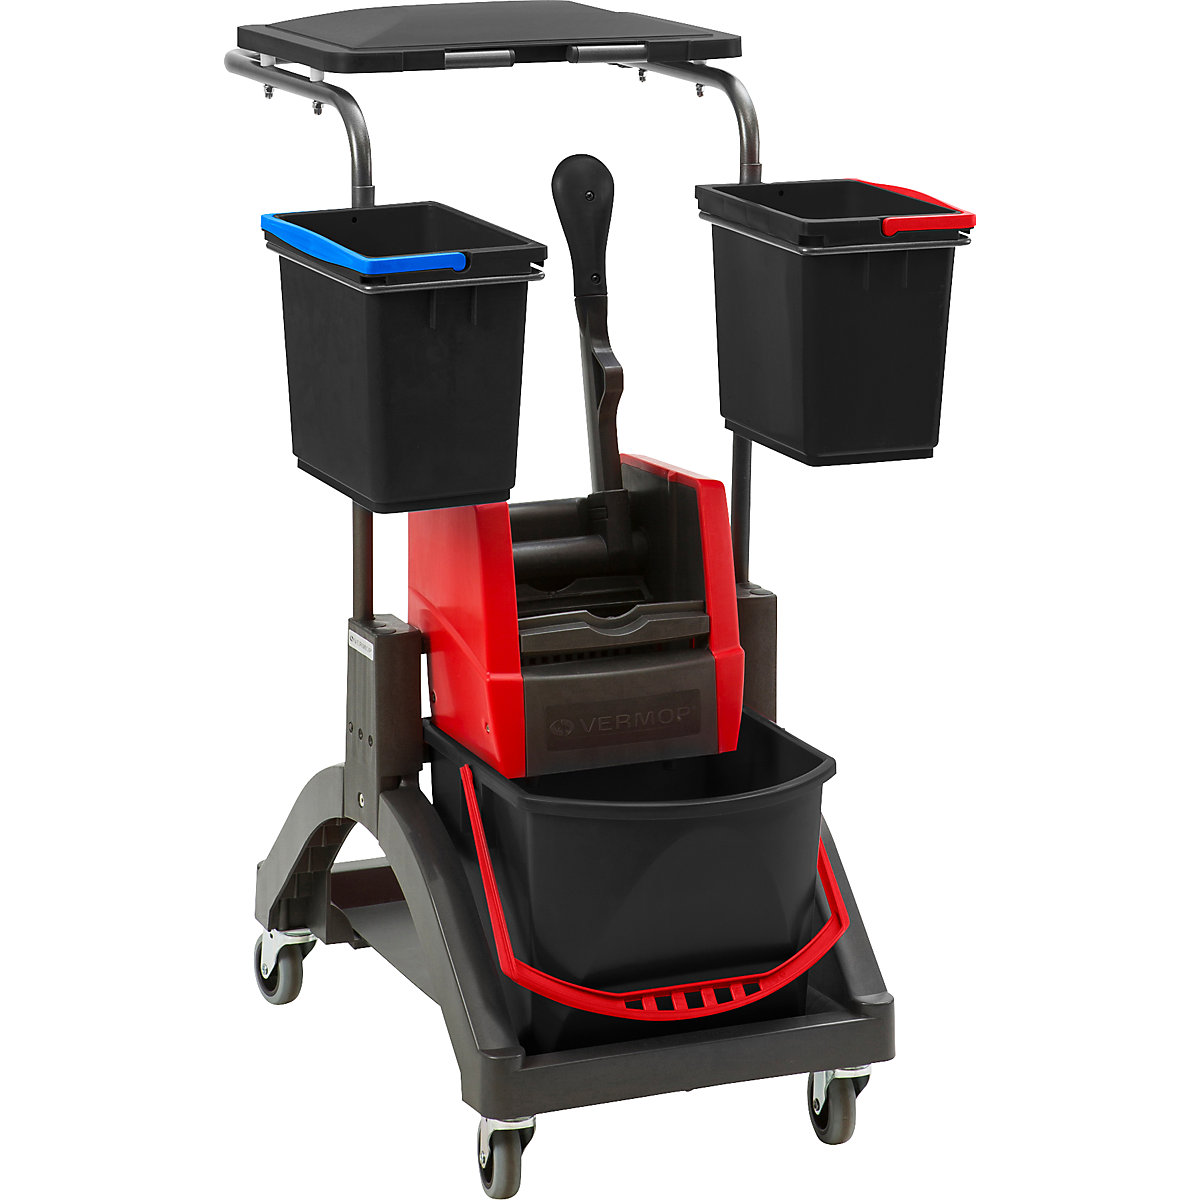 MISTRAL cleaning trolley – Vermop